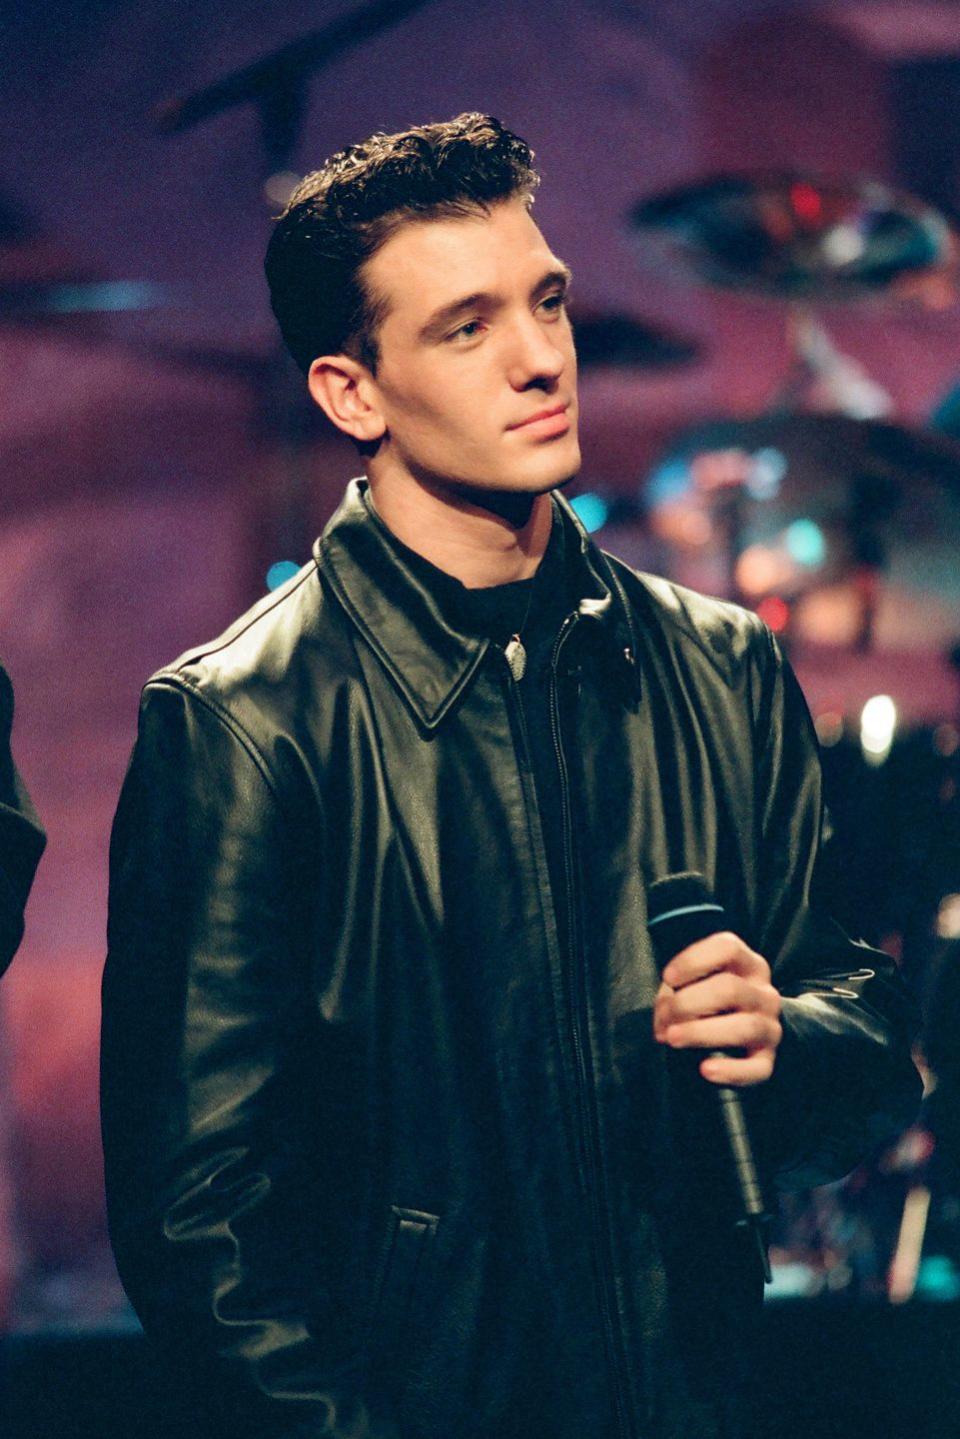 jc chasez holds a microphone at his chest and looks to the right, he wears a black jacket over a black shirt